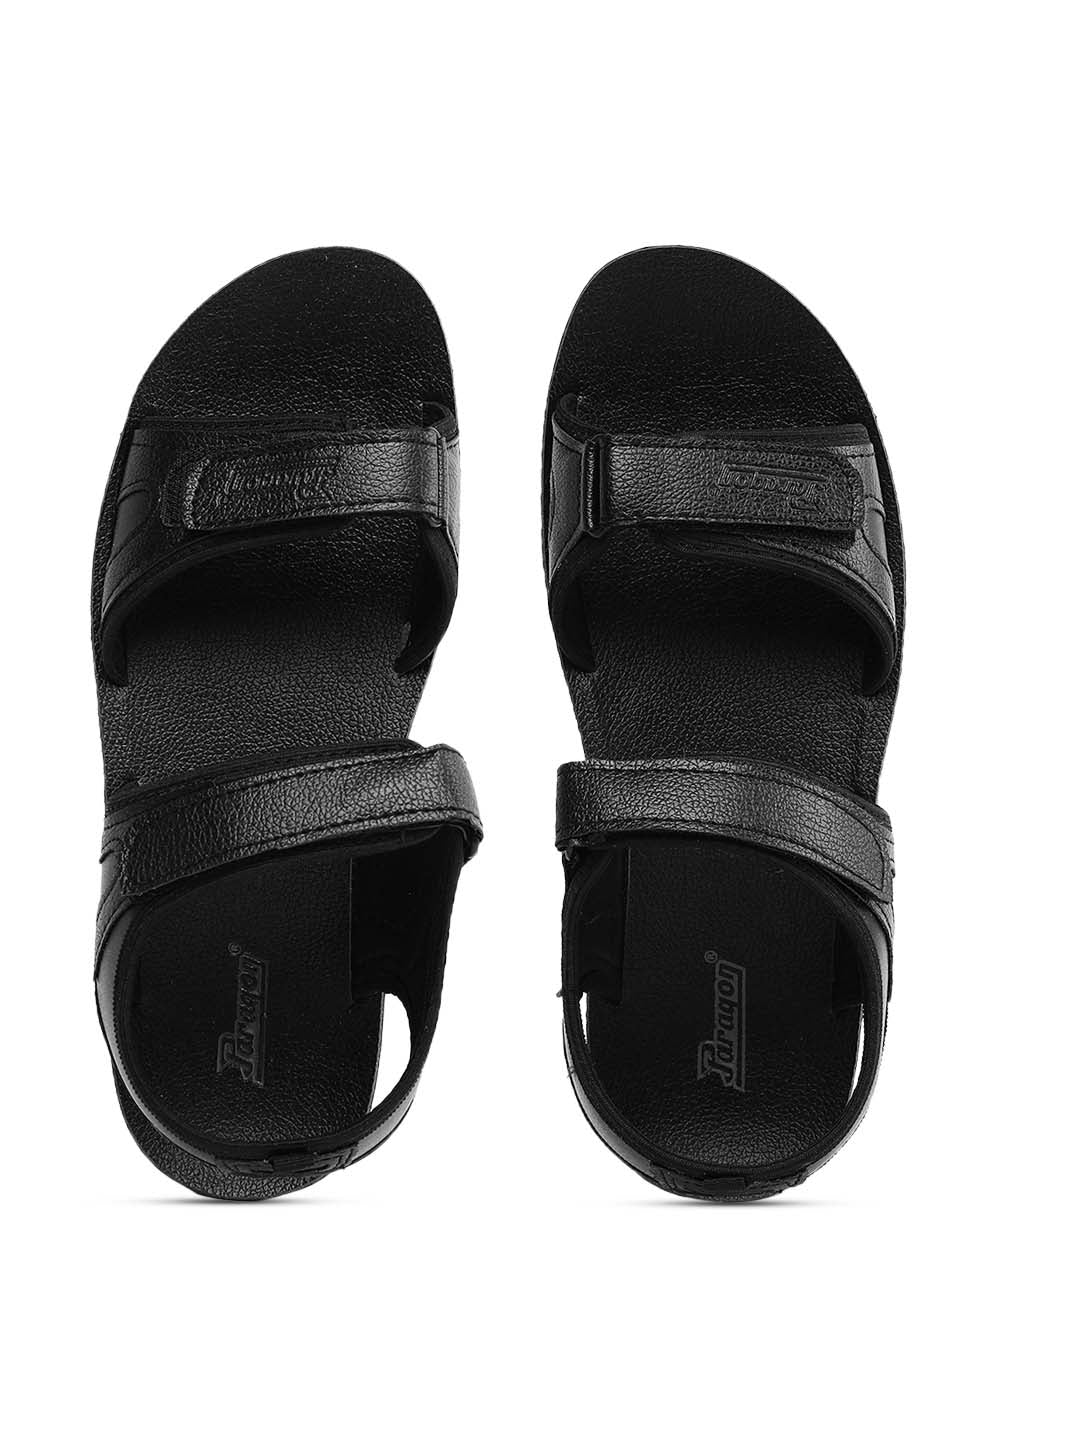 Paragon PU8885G Men Stylish Sandals | Comfortable Sandals for Daily Outdoor Use | Casual Formal Sandals with Cushioned Soles